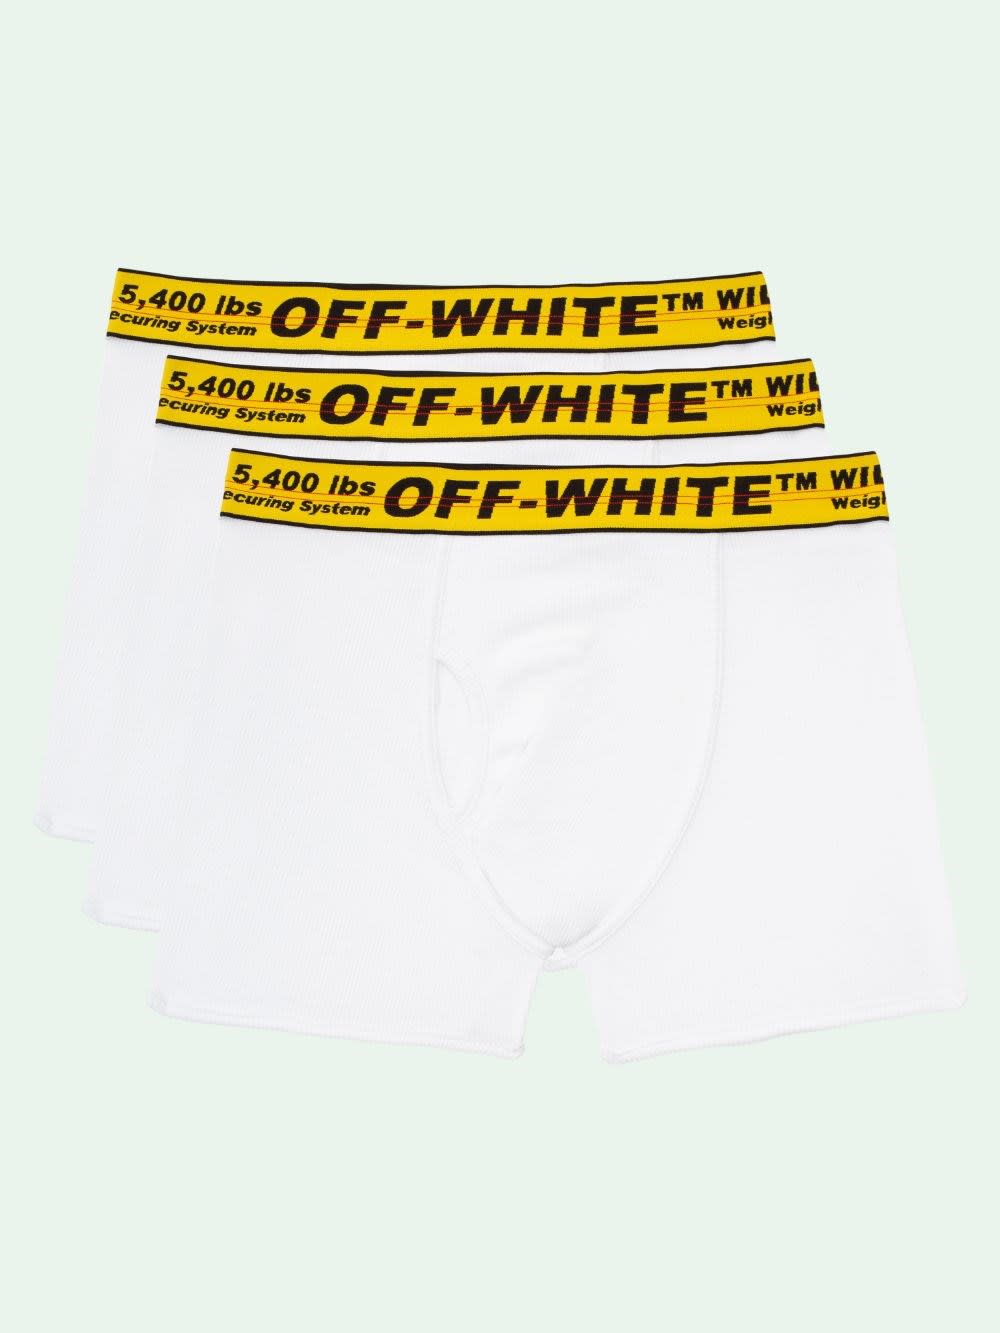 OFF-WHITE TRIPACK CLASSIC INDUSTRIAL,11903762